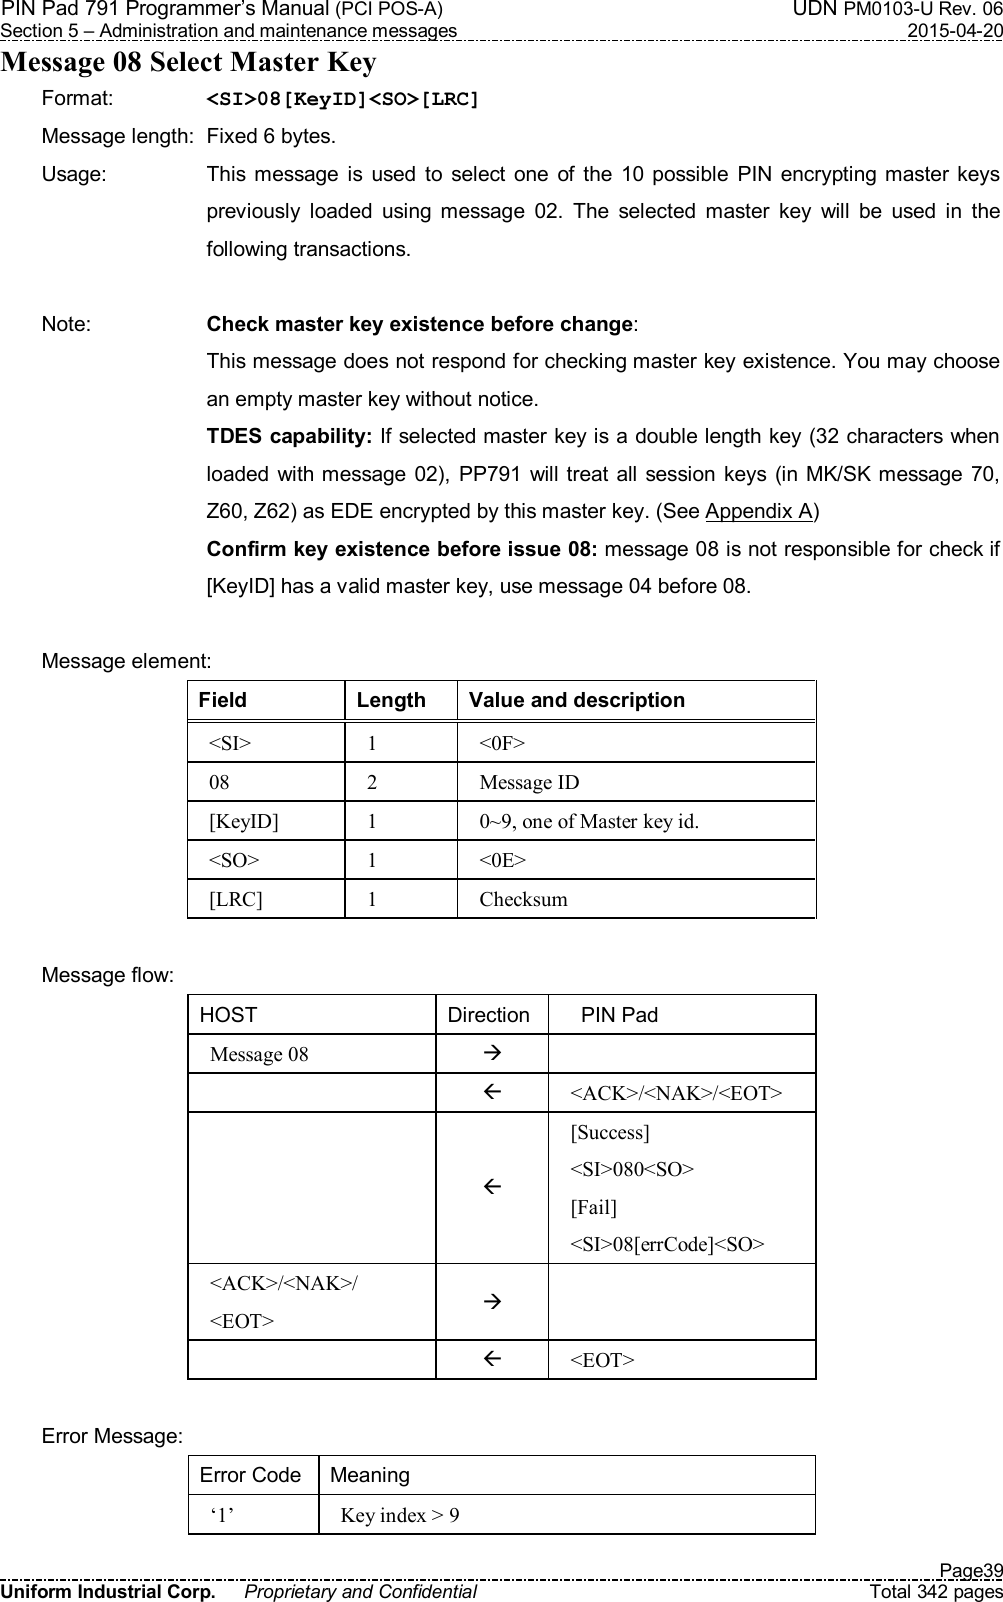 PIN Pad 791 Programmer’s Manual (PCI POS-A)  UDN PM0103-U Rev. 06 Section 5 – Administration and maintenance messages  2015-04-20   Page39 Uniform Industrial Corp.  Proprietary and Confidential  Total 342 pages Message 08 Select Master Key Format:    &lt;SI&gt;08[KeyID]&lt;SO&gt;[LRC] Message length:  Fixed 6 bytes. Usage:  This message  is  used  to  select  one  of  the  10  possible  PIN  encrypting  master keys previously  loaded  using  message  02.  The  selected  master  key  will  be  used  in  the following transactions.  Note:  Check master key existence before change: This message does not respond for checking master key existence. You may choose an empty master key without notice.   TDES capability: If selected master key is a double length key (32 characters when loaded with  message  02), PP791 will treat  all  session  keys (in MK/SK  message  70, Z60, Z62) as EDE encrypted by this master key. (See Appendix A)   Confirm key existence before issue 08: message 08 is not responsible for check if [KeyID] has a valid master key, use message 04 before 08.  Message element: Field  Length  Value and description &lt;SI&gt;  1  &lt;0F&gt; 08  2  Message ID [KeyID]  1  0~9, one of Master key id. &lt;SO&gt;  1  &lt;0E&gt; [LRC]  1  Checksum  Message flow: HOST  Direction      PIN Pad Message 08      &lt;ACK&gt;/&lt;NAK&gt;/&lt;EOT&gt;   [Success] &lt;SI&gt;080&lt;SO&gt; [Fail] &lt;SI&gt;08[errCode]&lt;SO&gt; &lt;ACK&gt;/&lt;NAK&gt;/ &lt;EOT&gt;     &lt;EOT&gt;  Error Message: Error Code Meaning ‘1’  Key index &gt; 9 